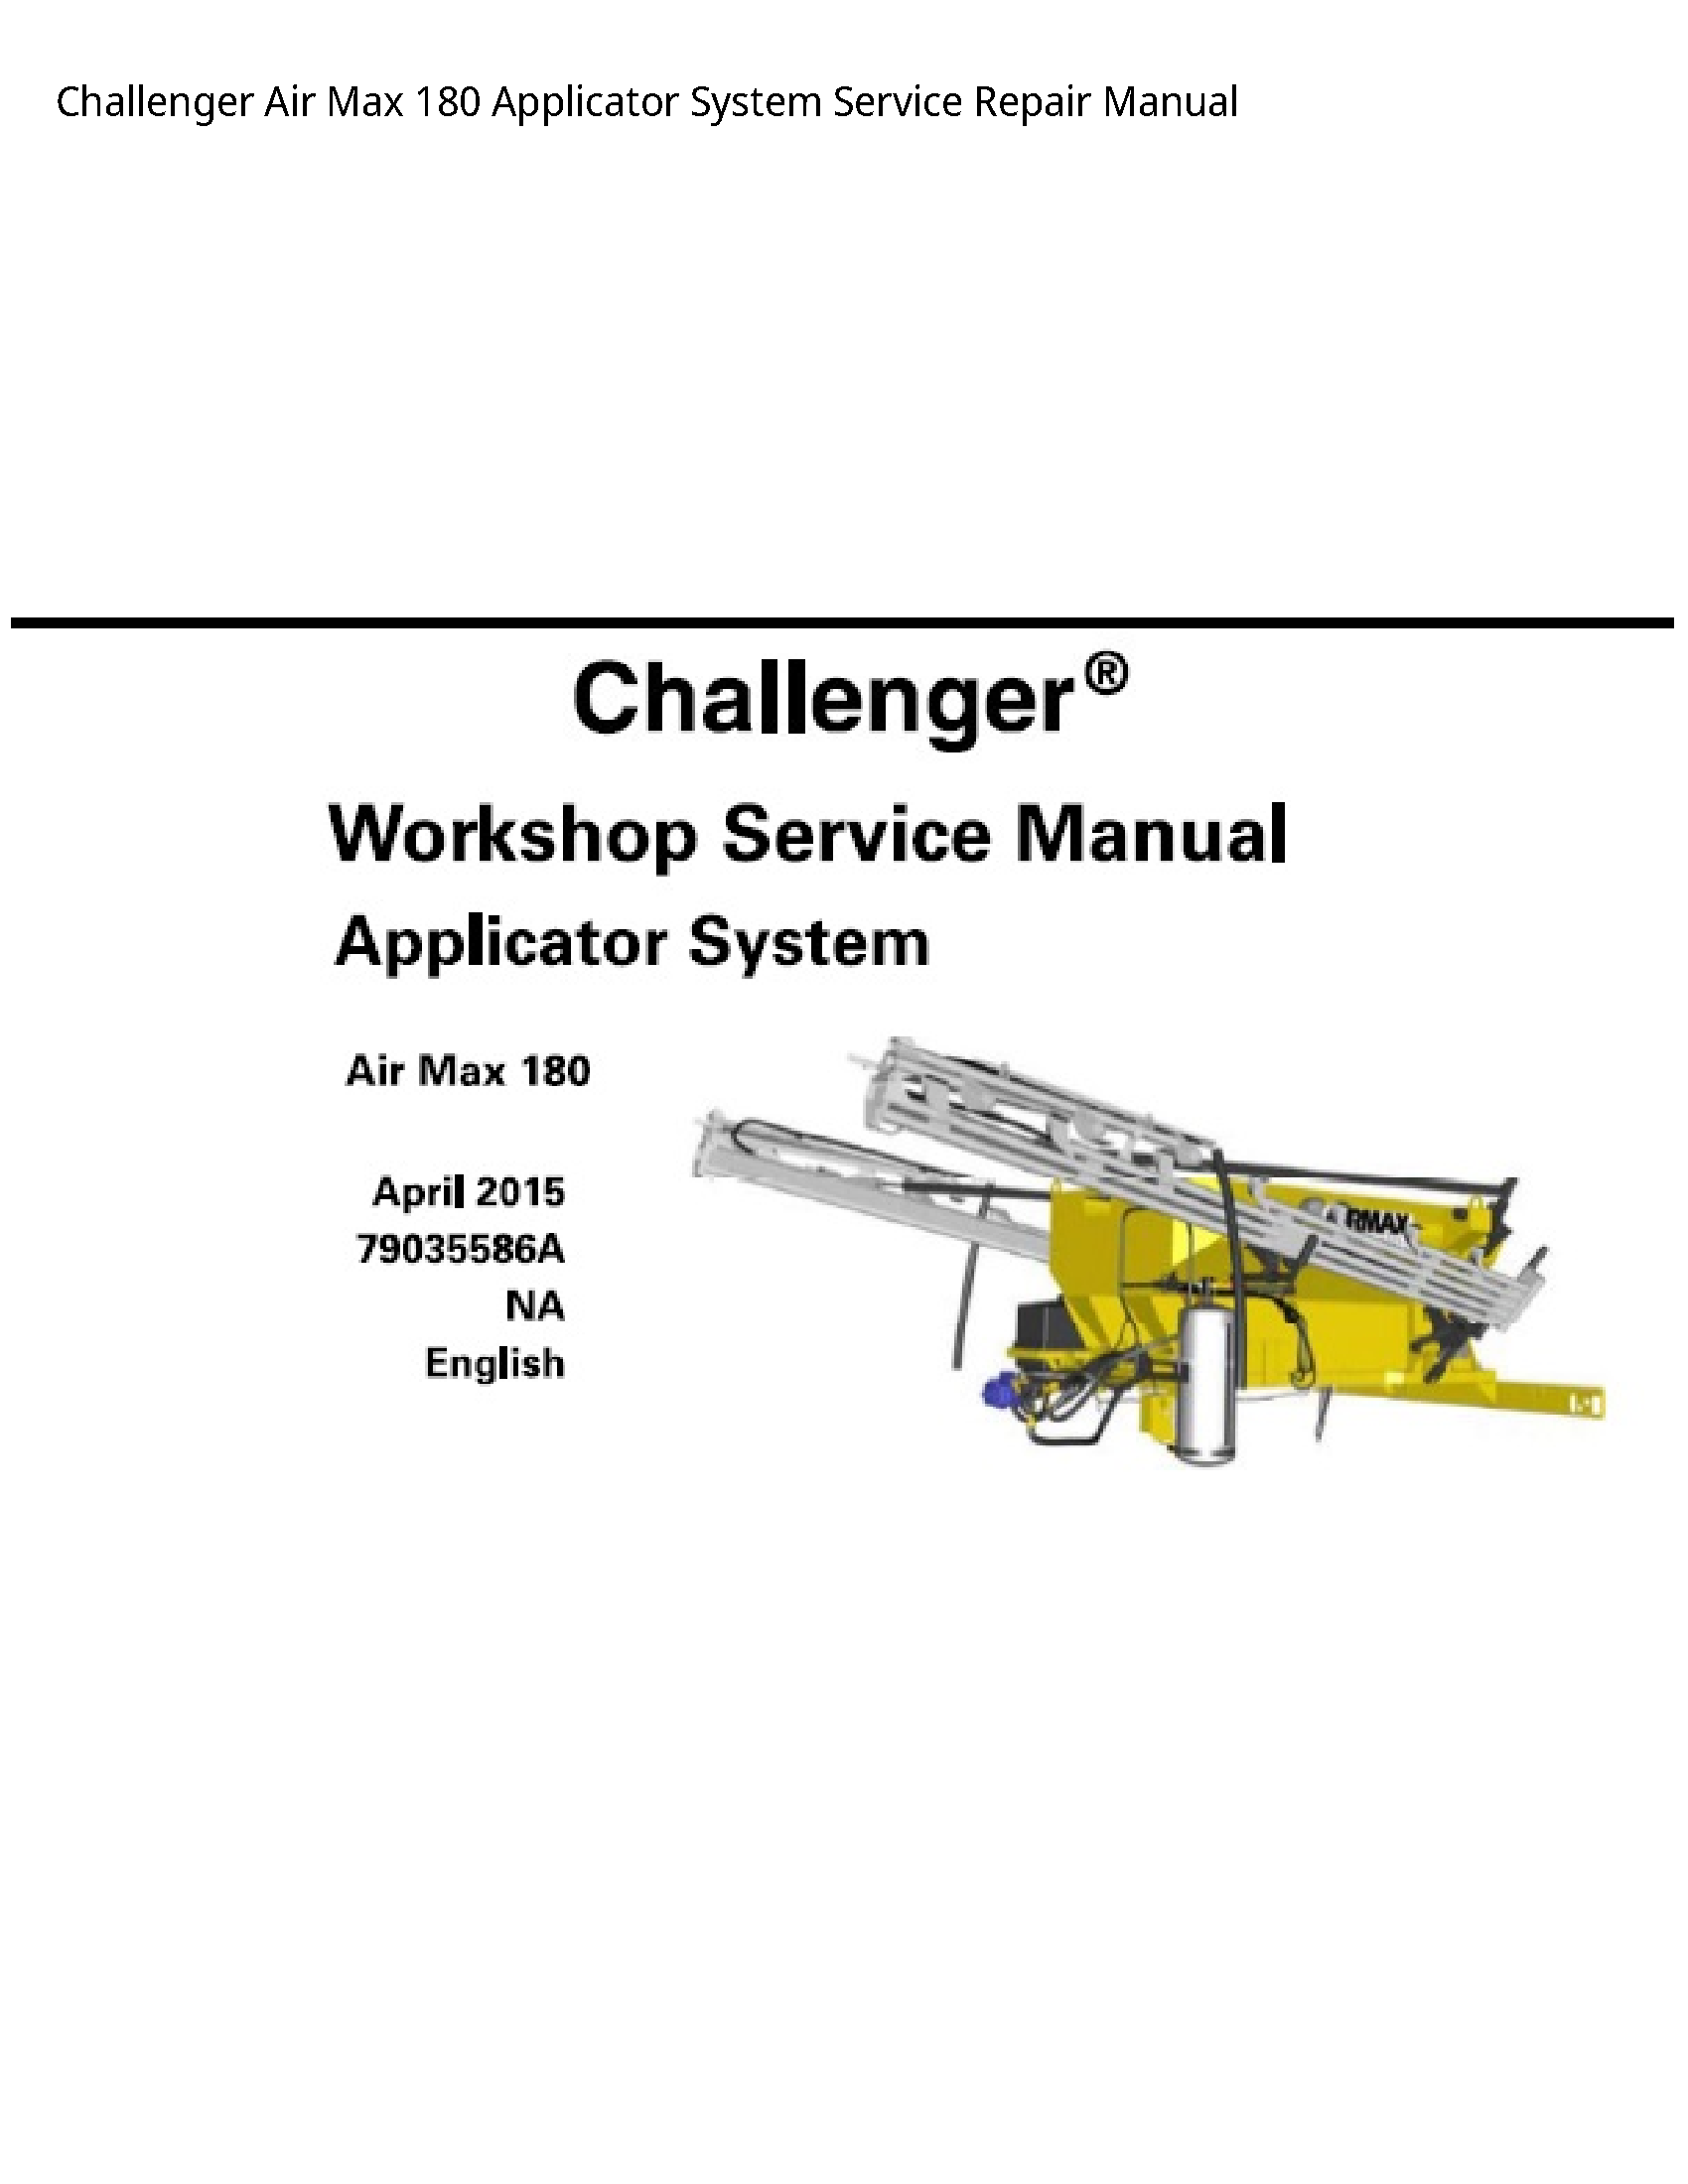 Challenger 180 Air Max Applicator System manual